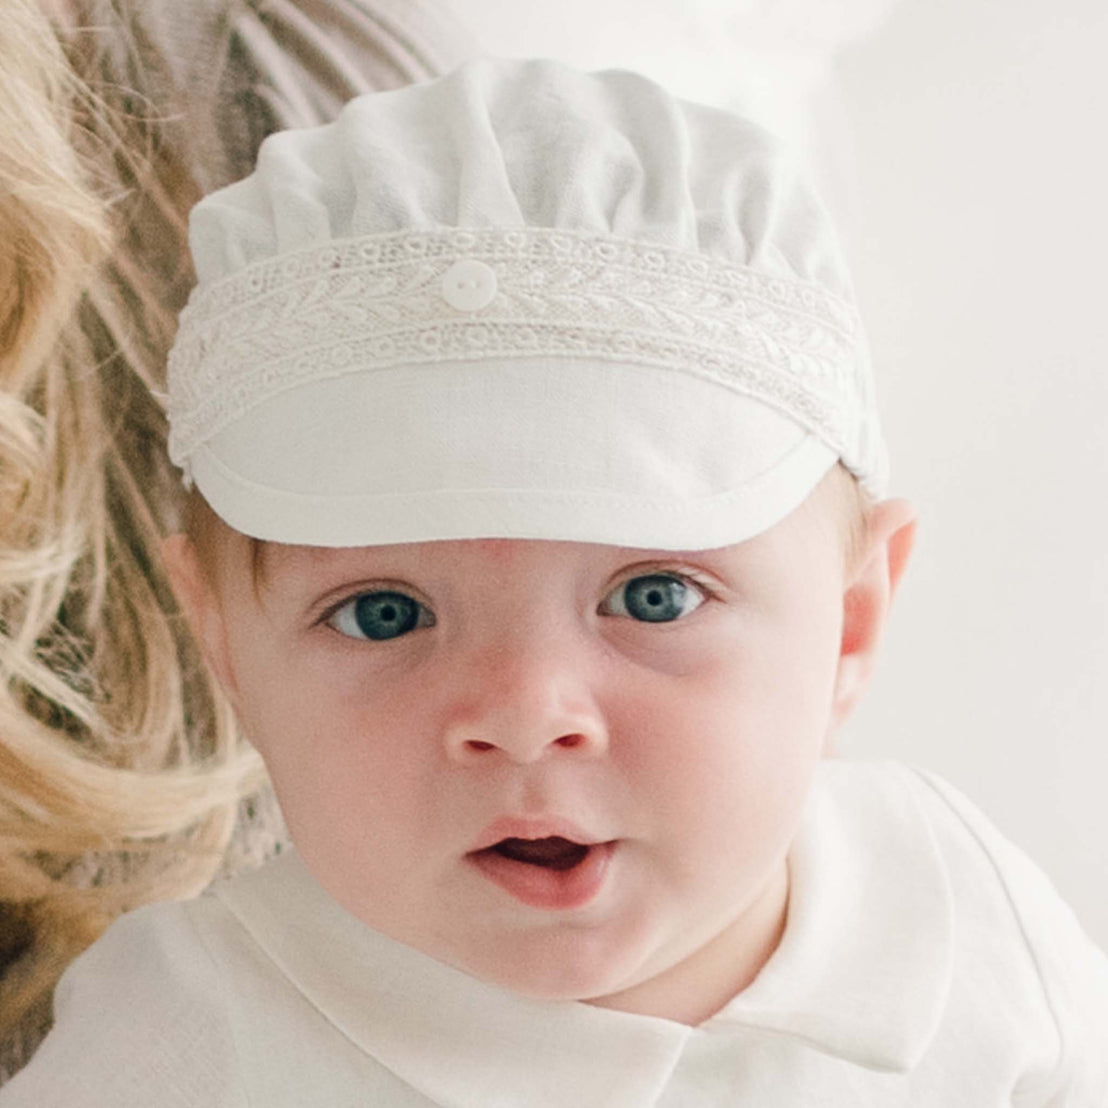 A baby with blue eyes and fair skin is wearing a white Oliver Linen Cap and a white outfit. The child appears to be looking directly at the camera. A partial view of an adult with long blonde hair is visible next to the baby.